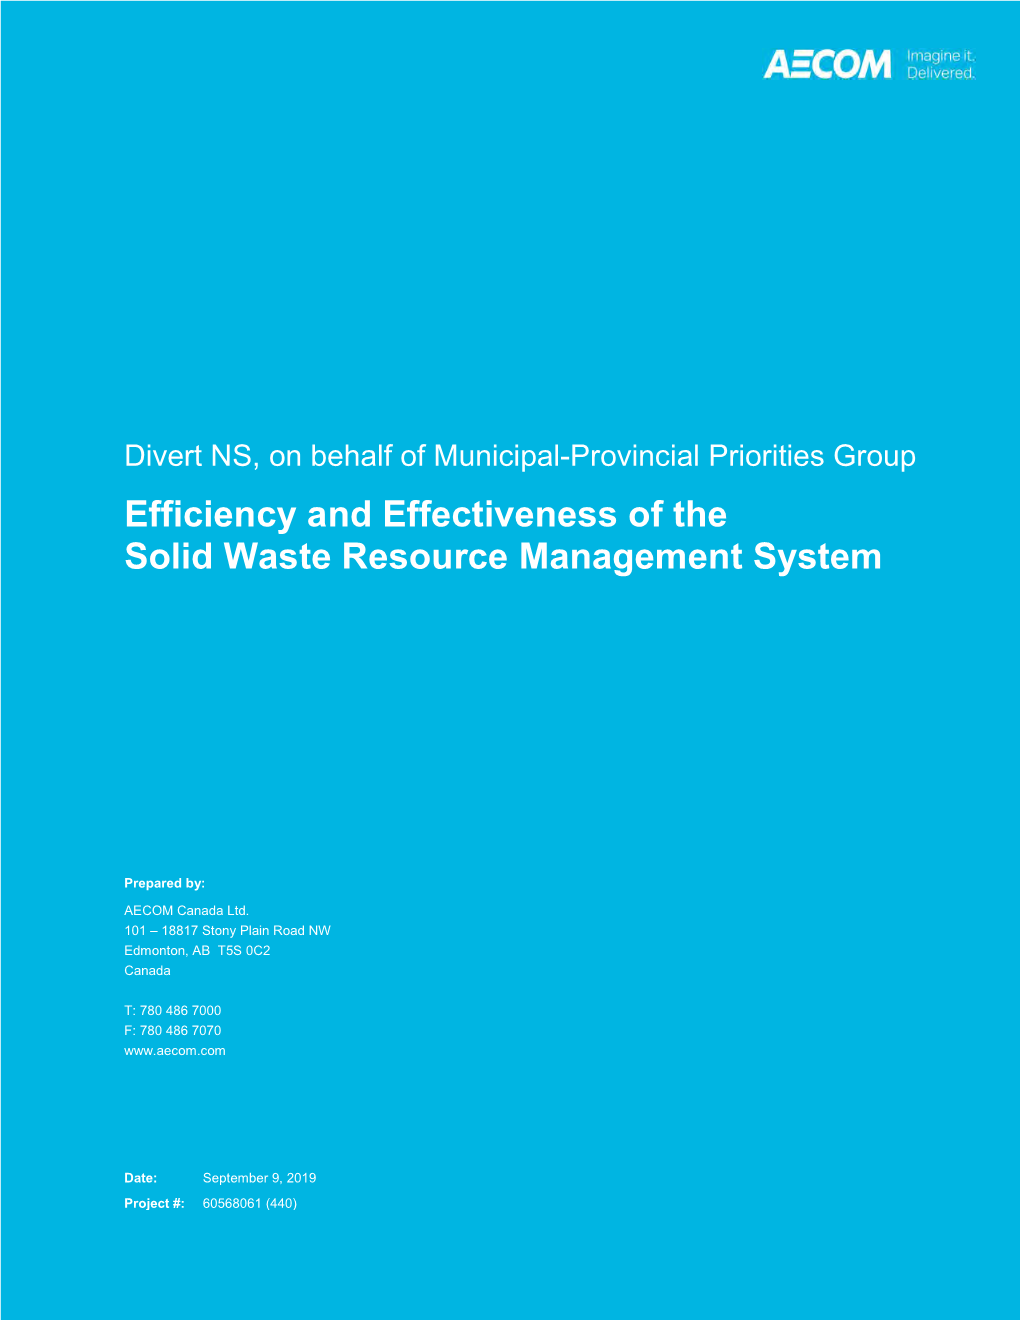 Efficiency and Effectiveness of the Solid Waste Resource Management System